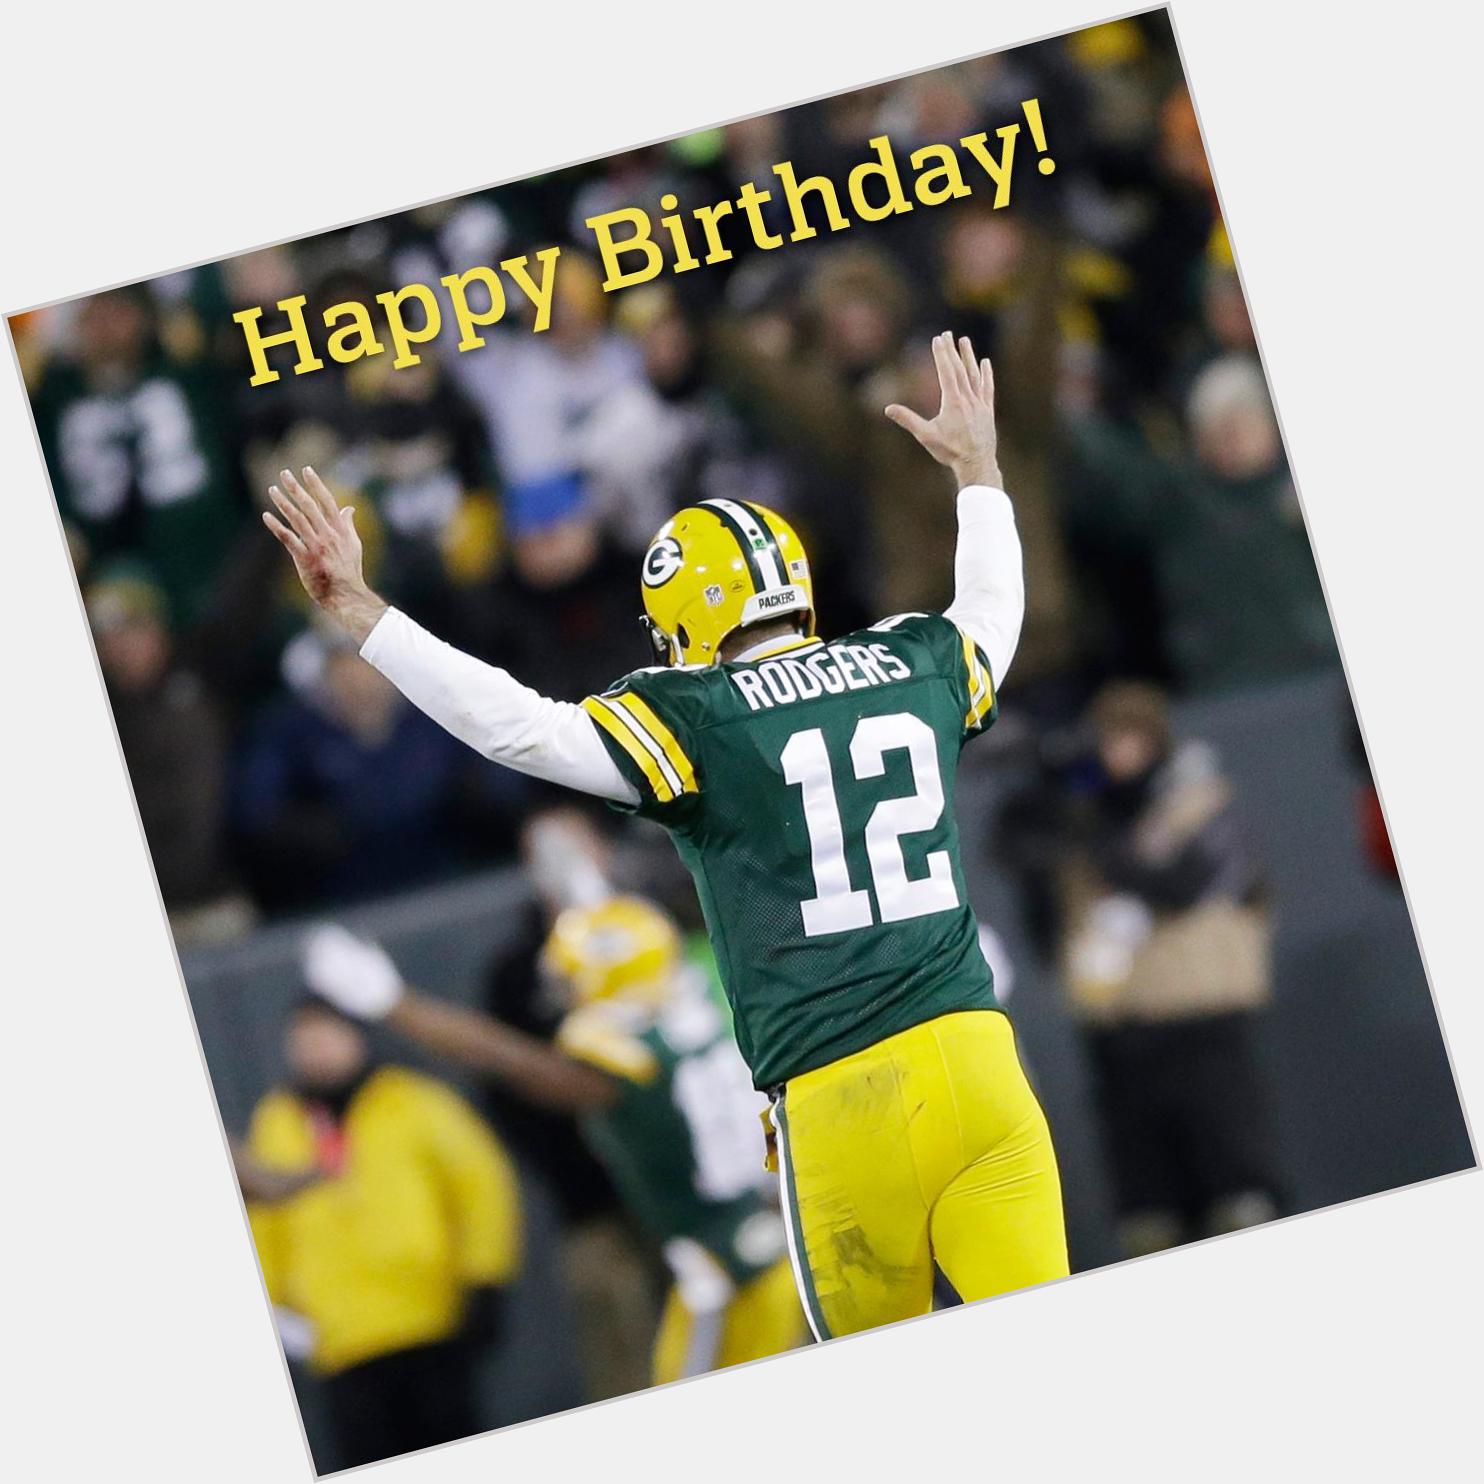 " to wish a Happy Birthday! I have the same birthday as Aaron Rodgers...